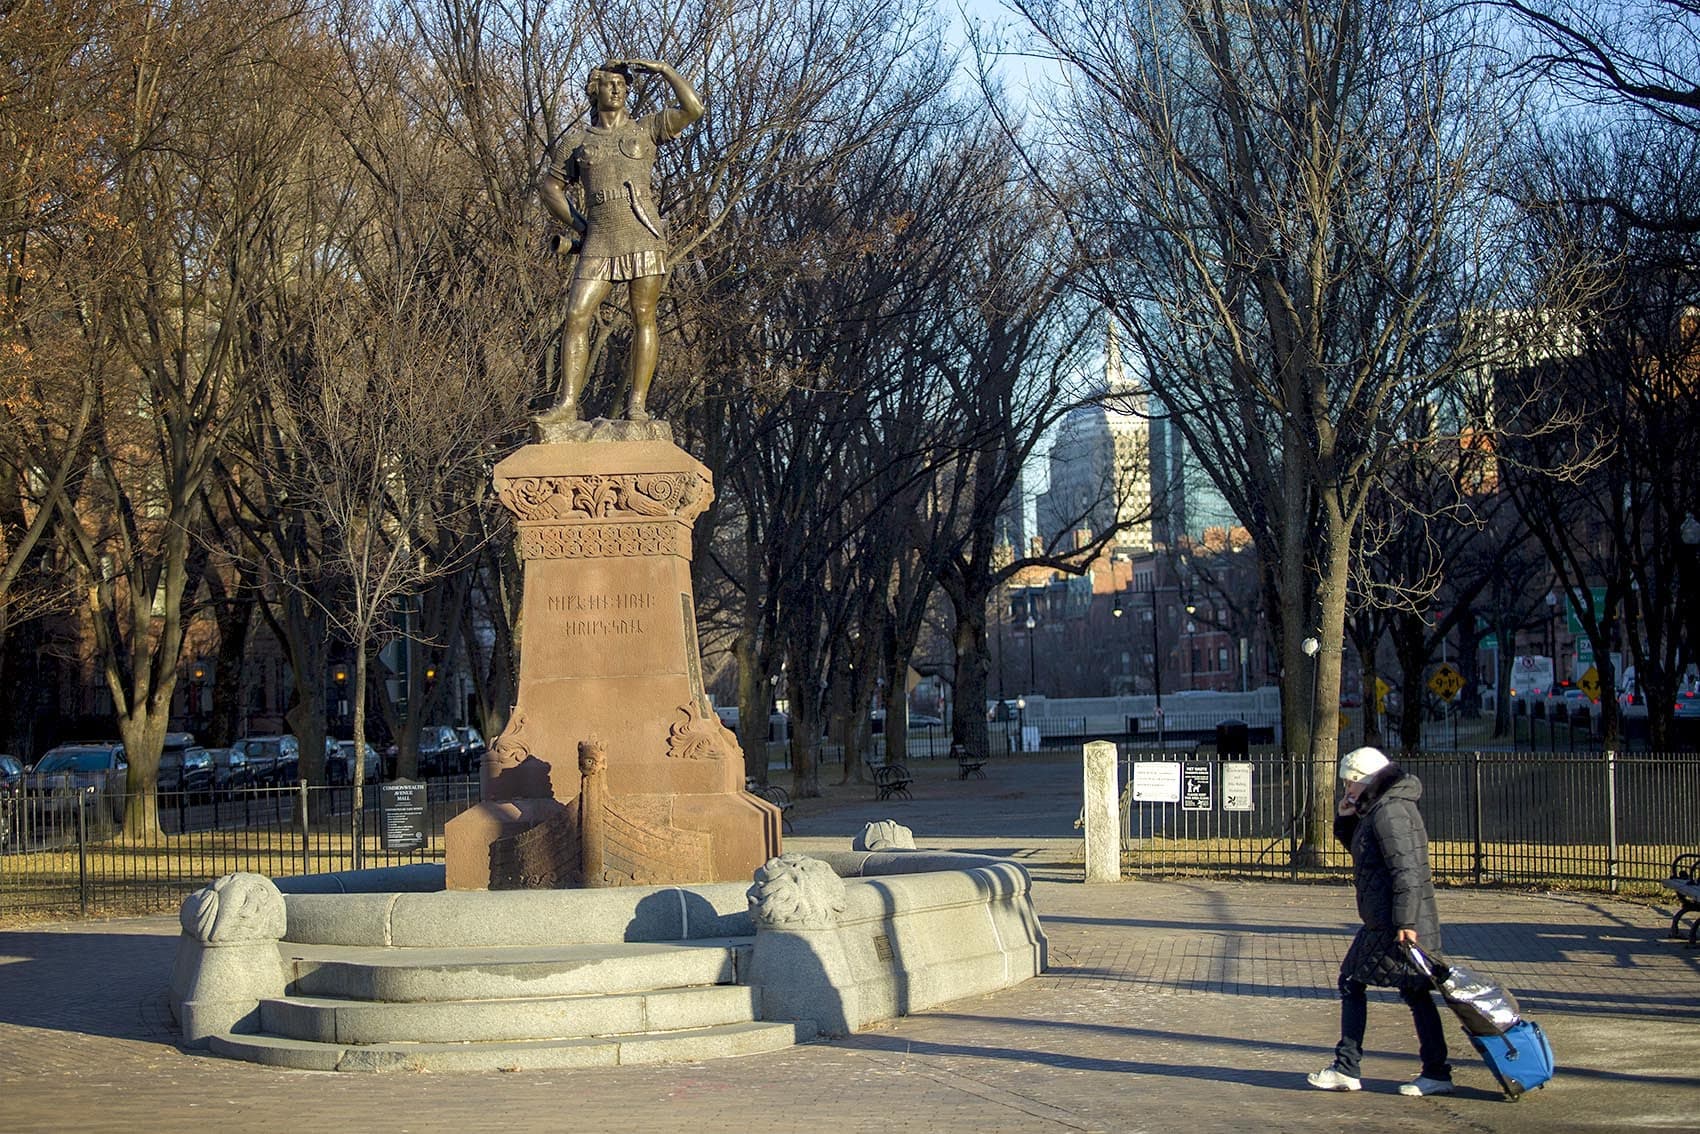 A statue of Leif Erikson looks out across the Muddy River in Charlesgate Park, Boston. (Robin Lubbock/WBUR)